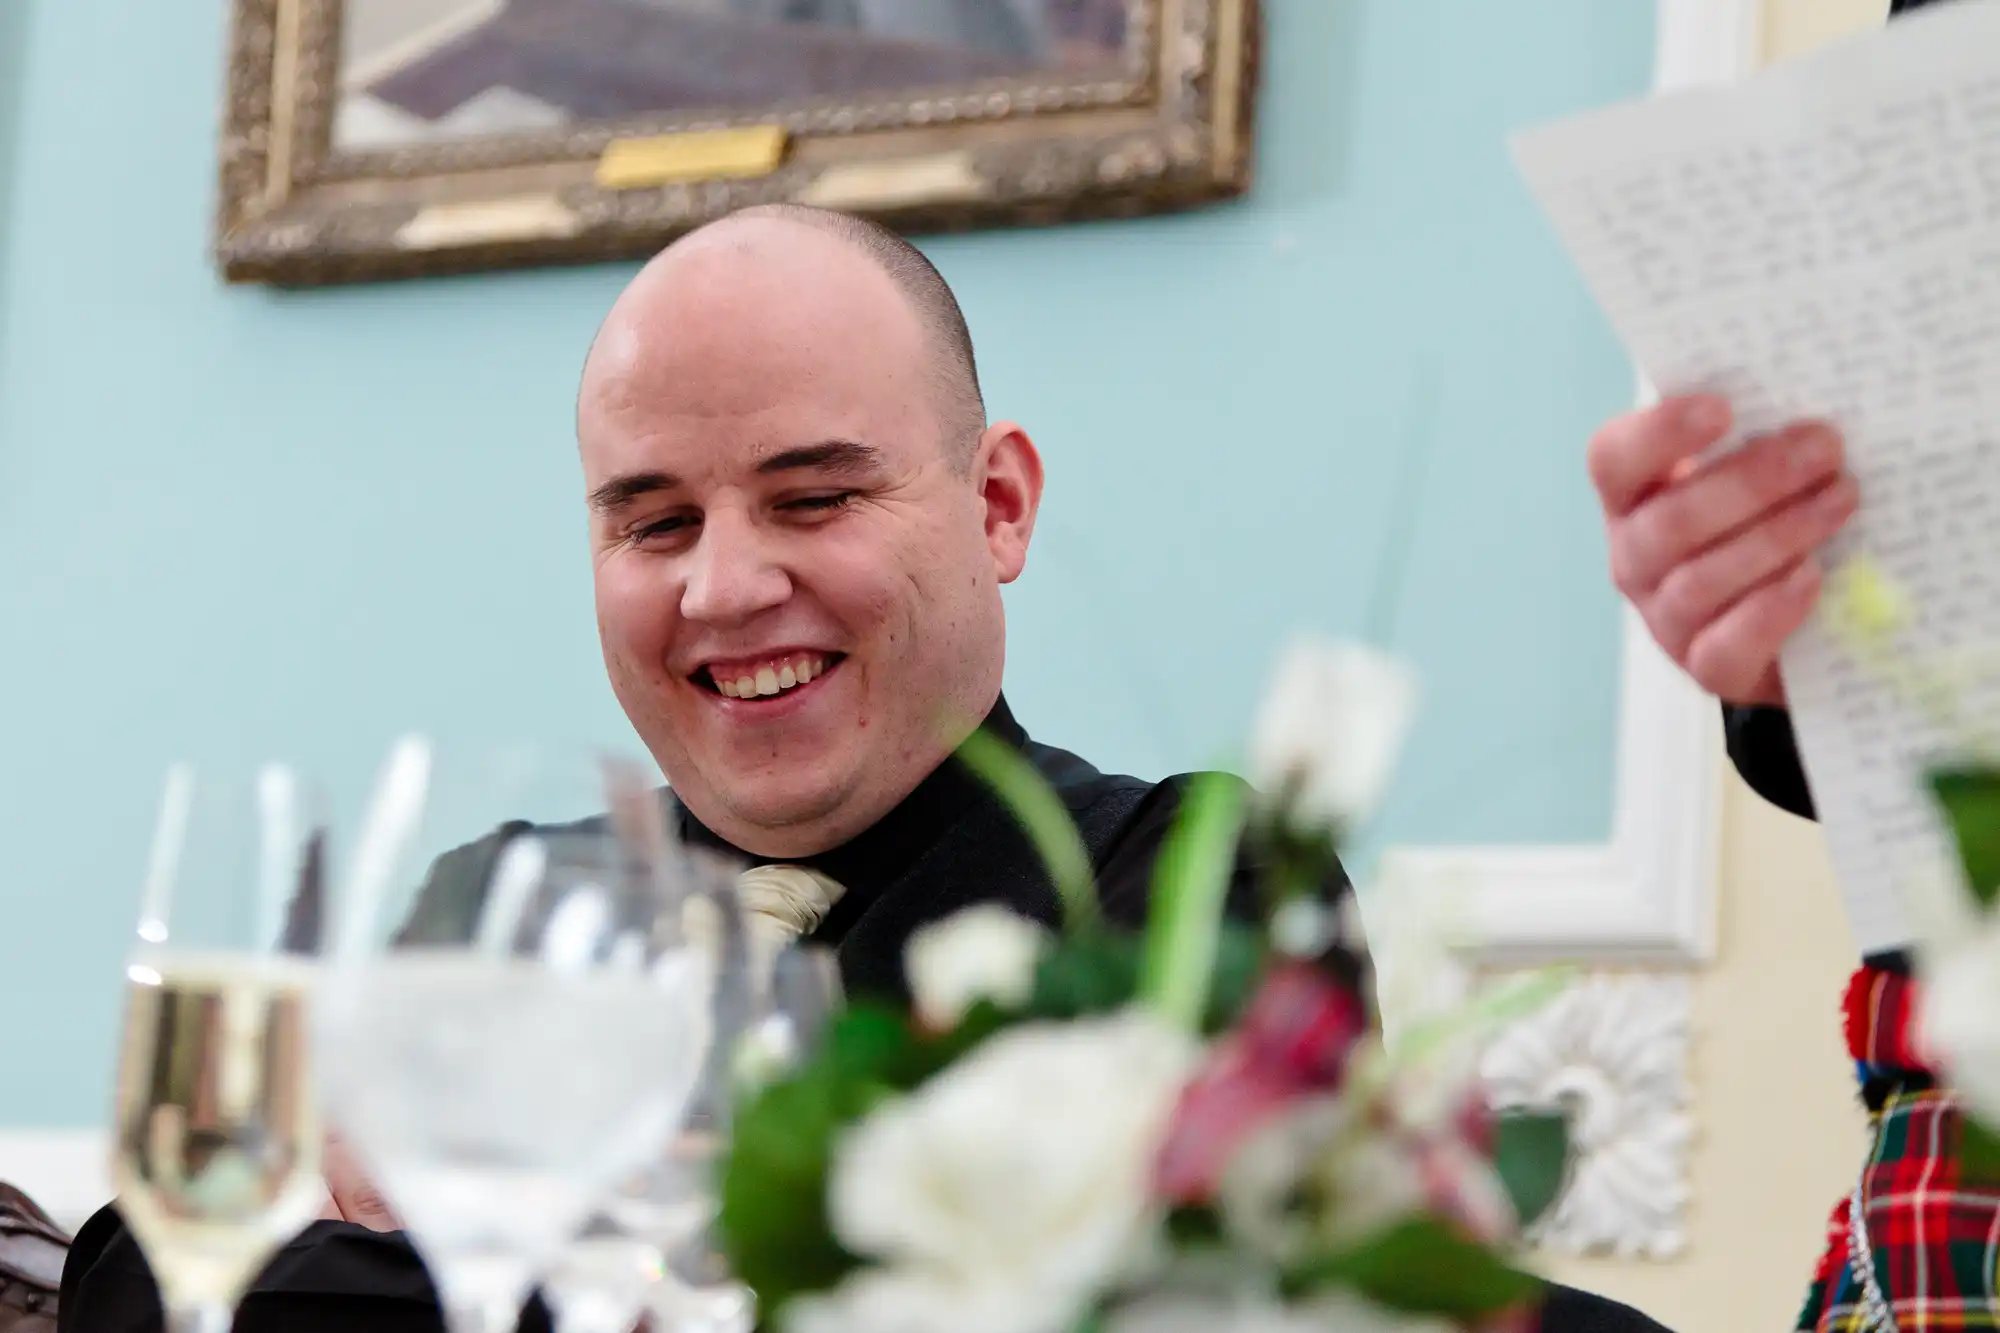 A bald man in a formal outfit smiles while seated at a table with flowers and wine glasses, with another person holding a paper nearby.